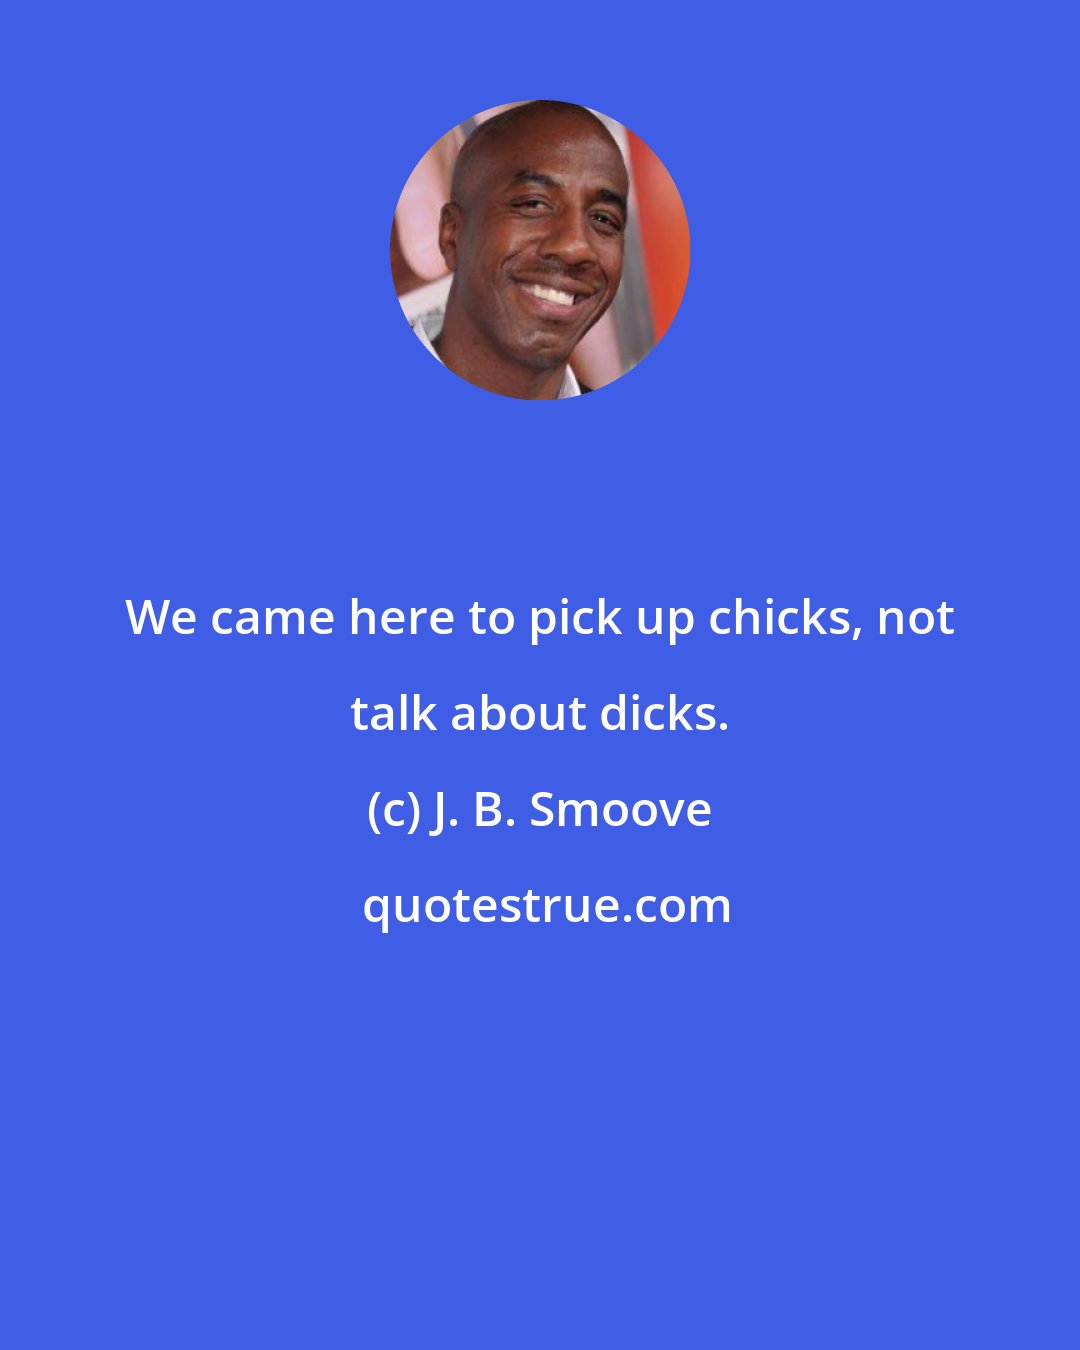 J. B. Smoove: We came here to pick up chicks, not talk about dicks.